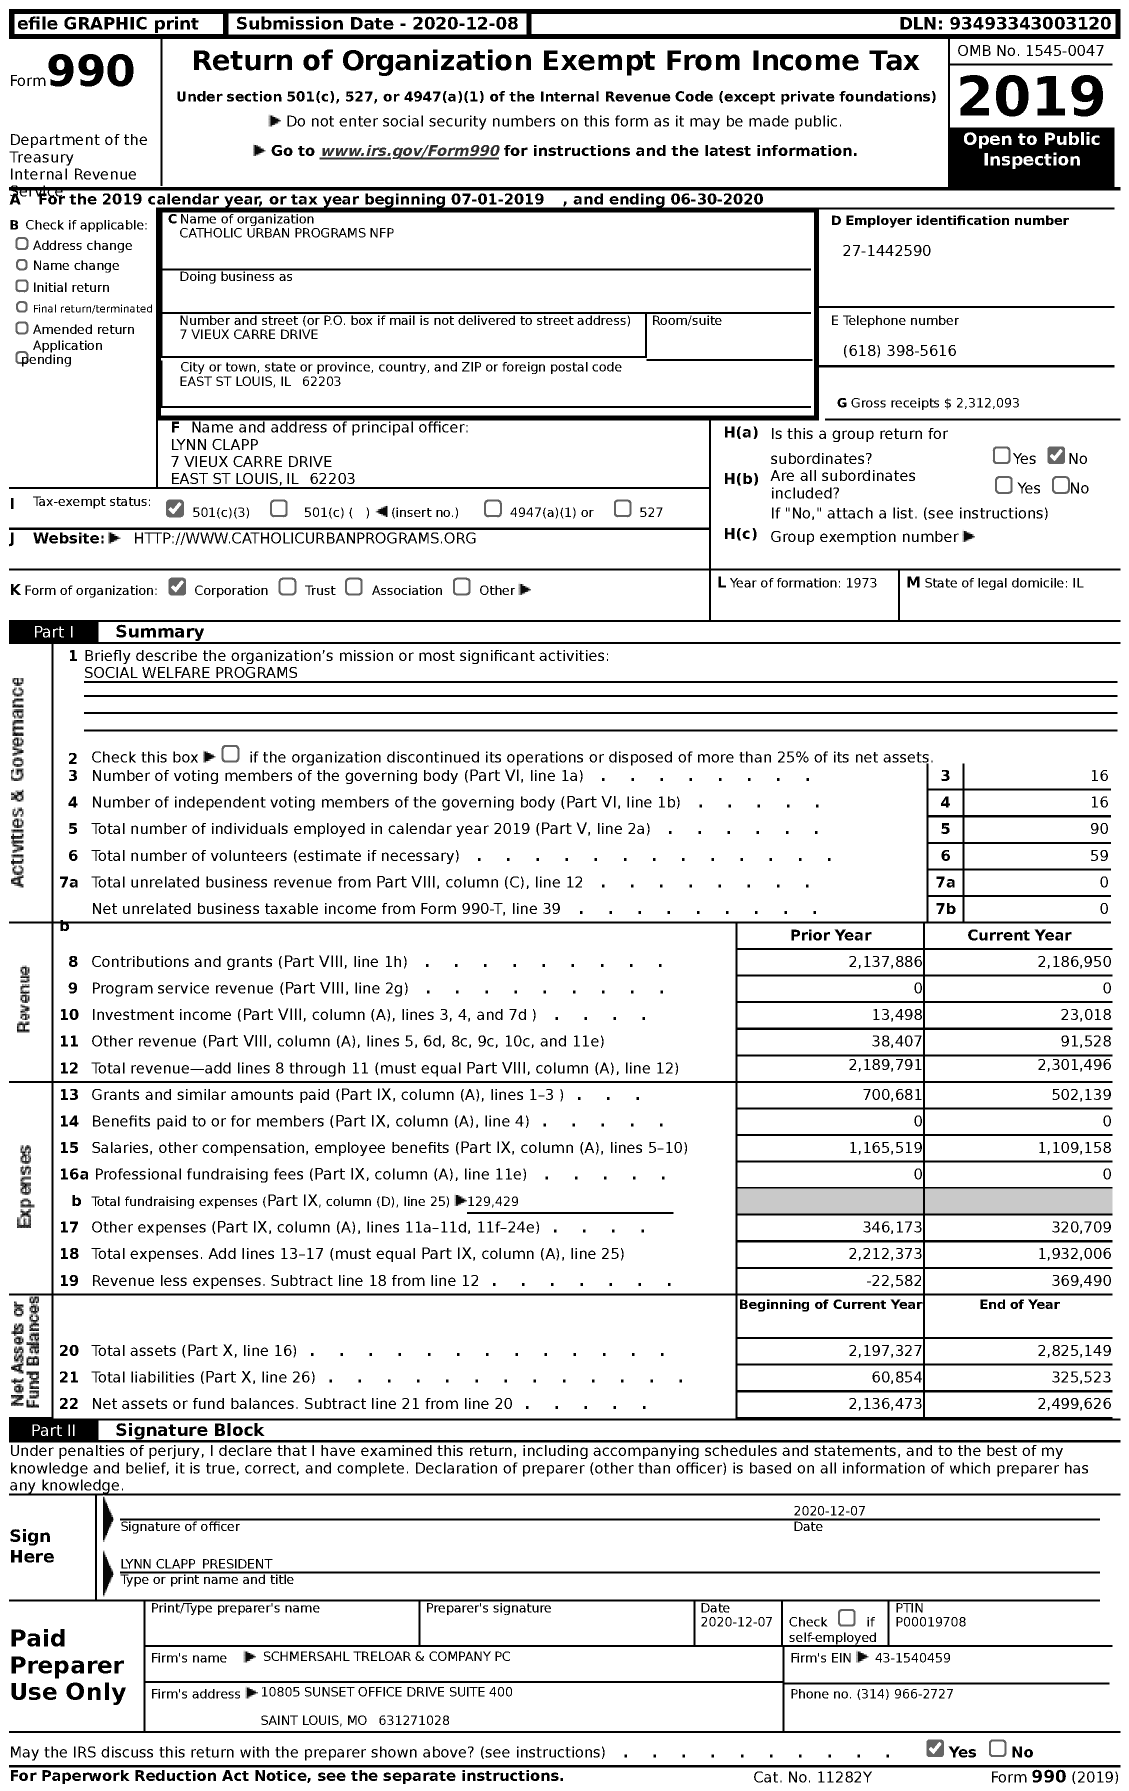 Image of first page of 2019 Form 990 for Catholic Urban Programs NFP